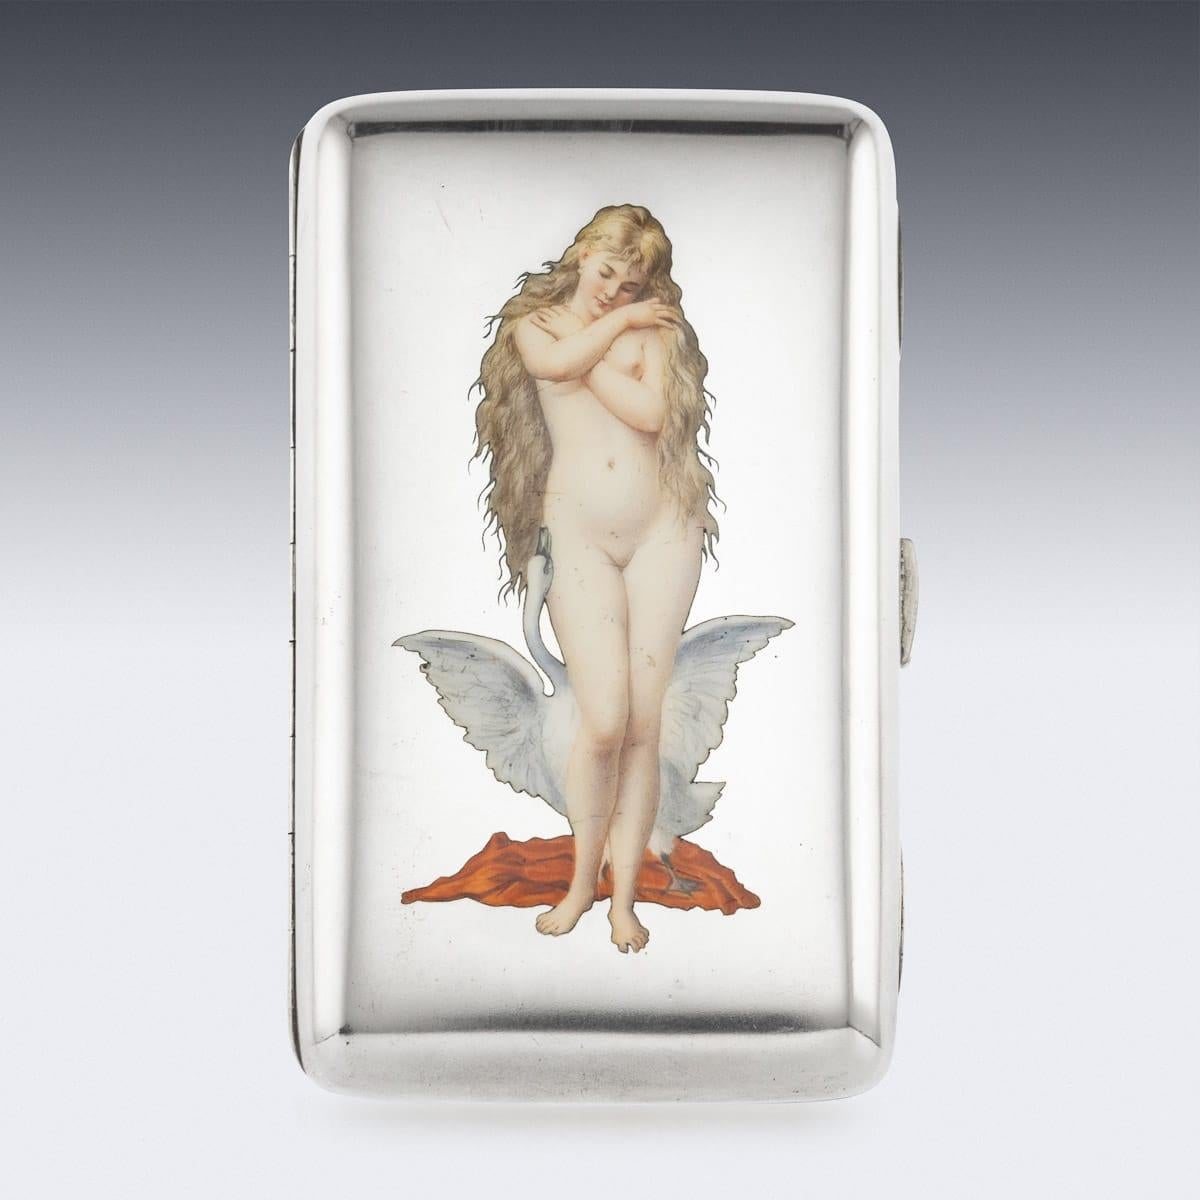 Antique early 20th century Austrian large and exceptional solid silver and enamel cigar case, of rounded rectangular form, the surface applied with multi-colored and shaded enamels depicting Leda and the Swan, the reverse is plain, the inside is